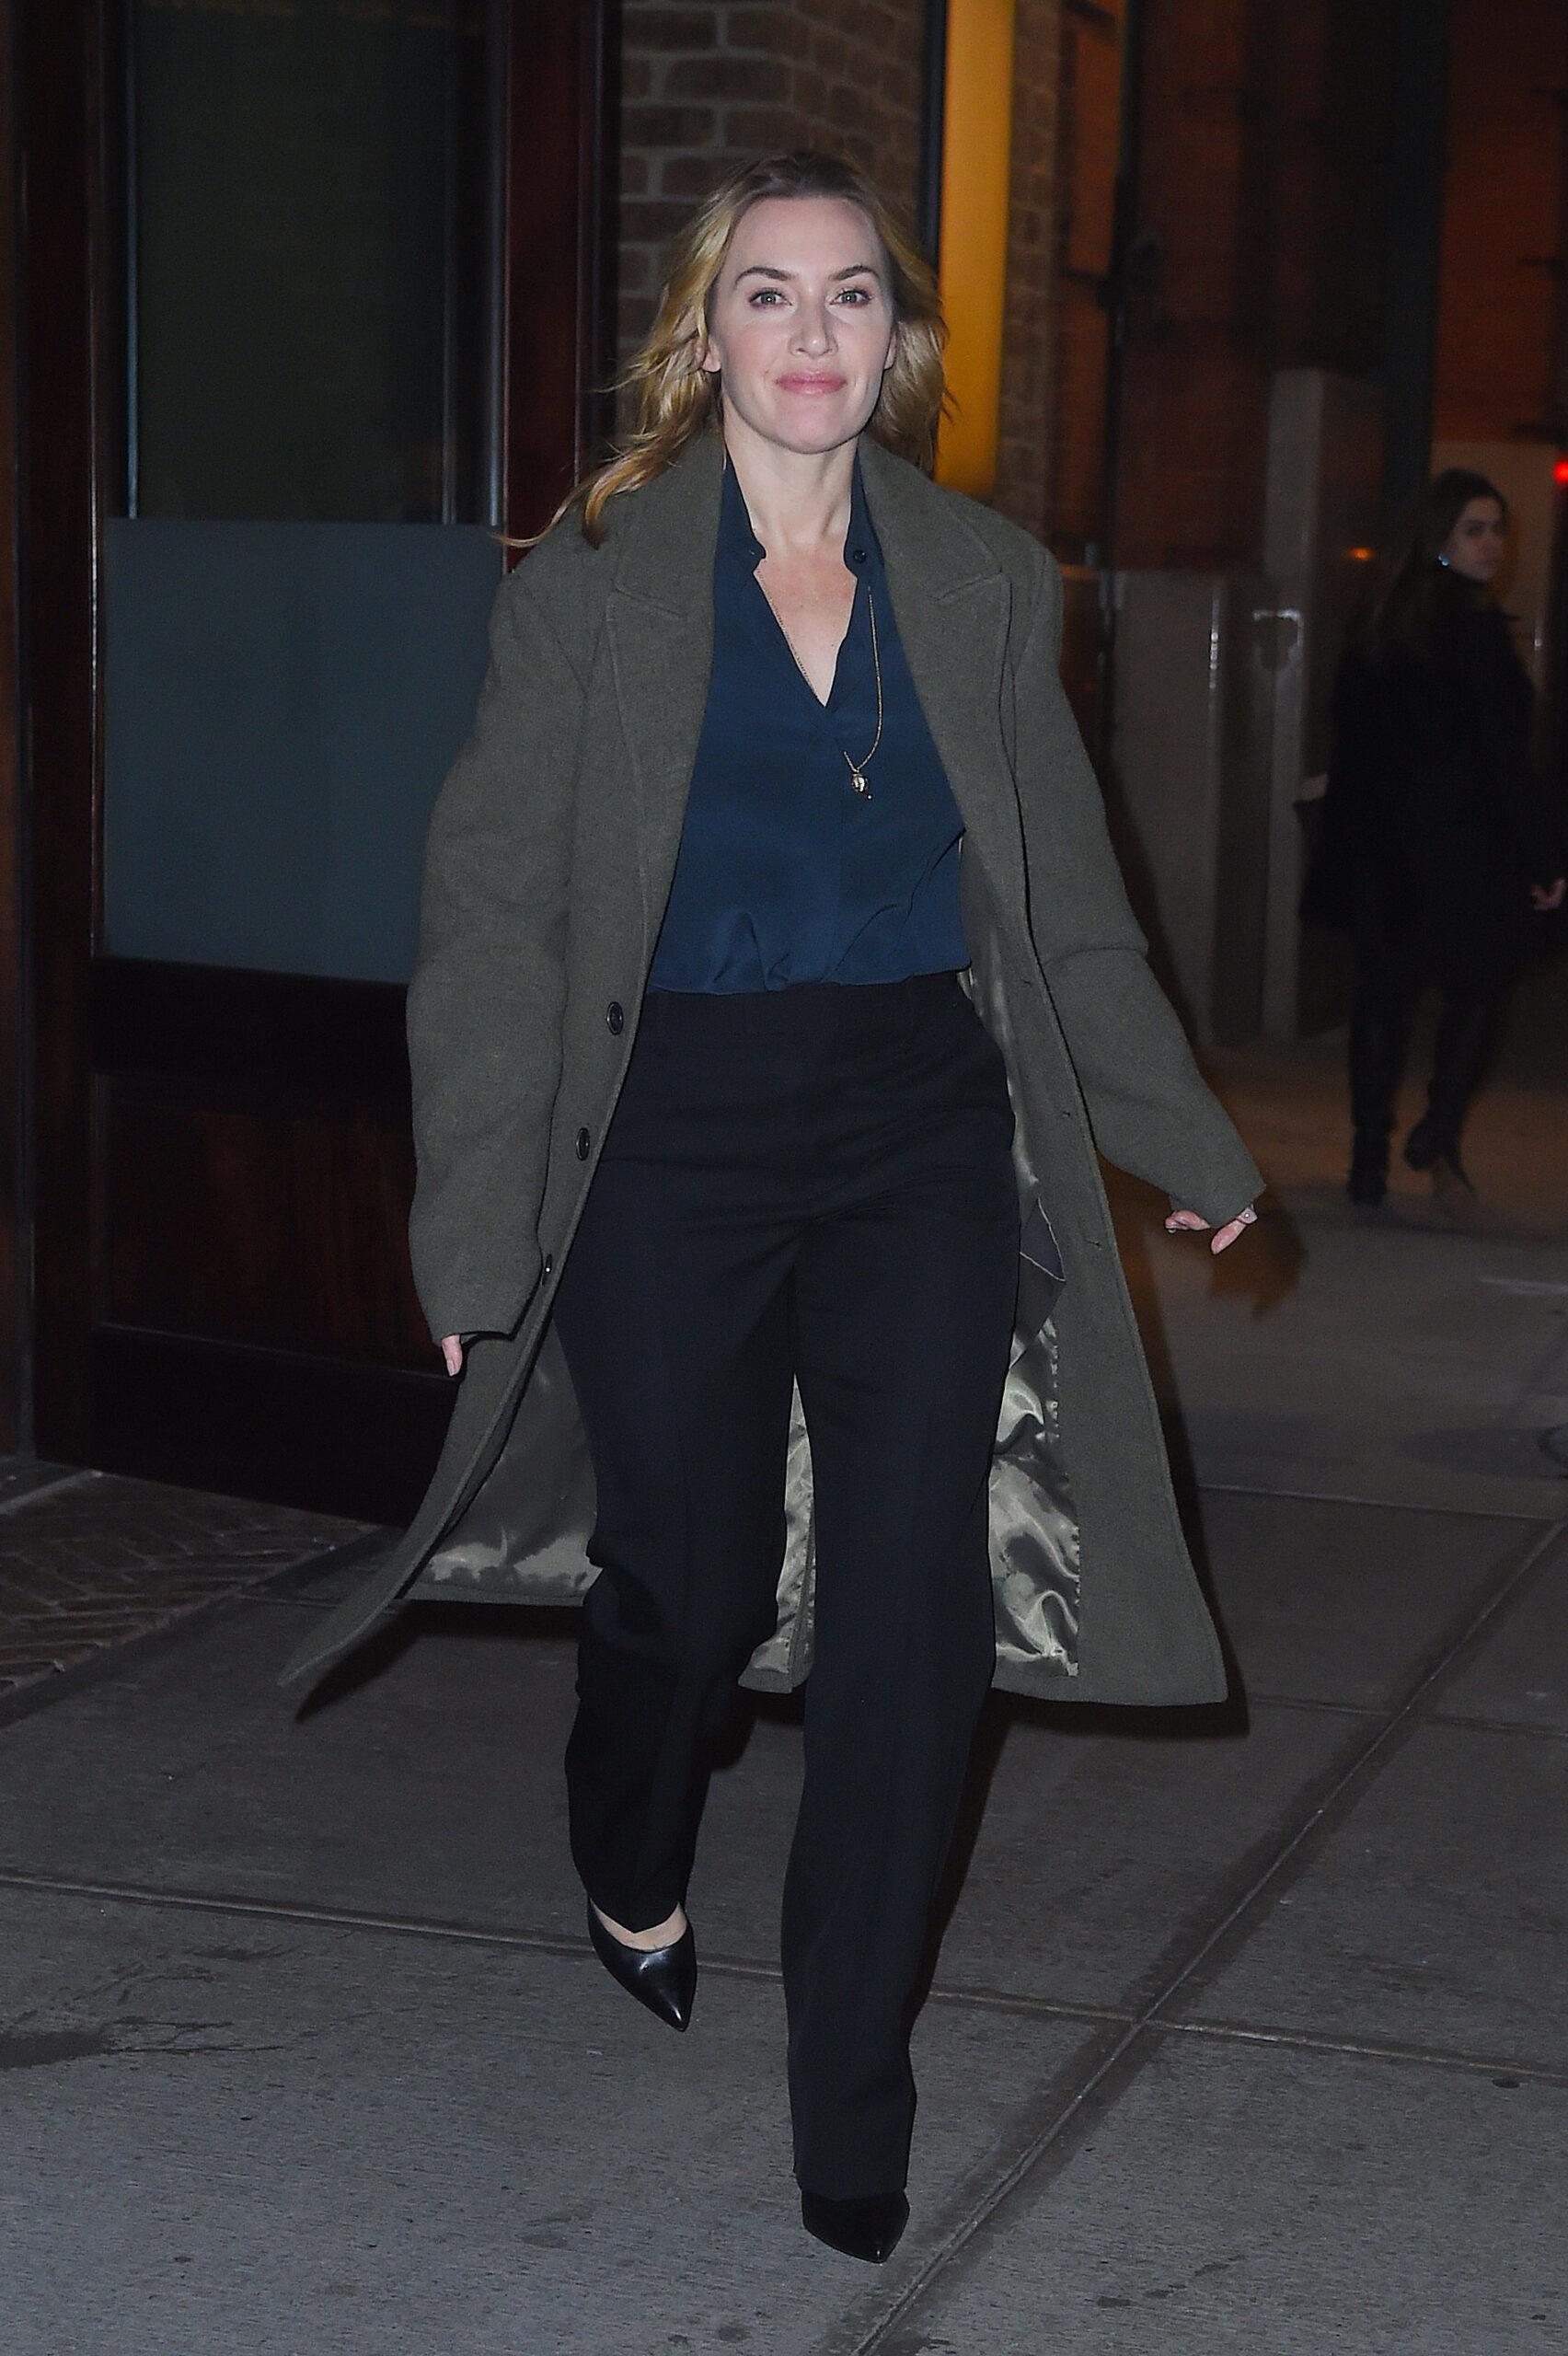 Kate Winslet heads out in a long trench coat